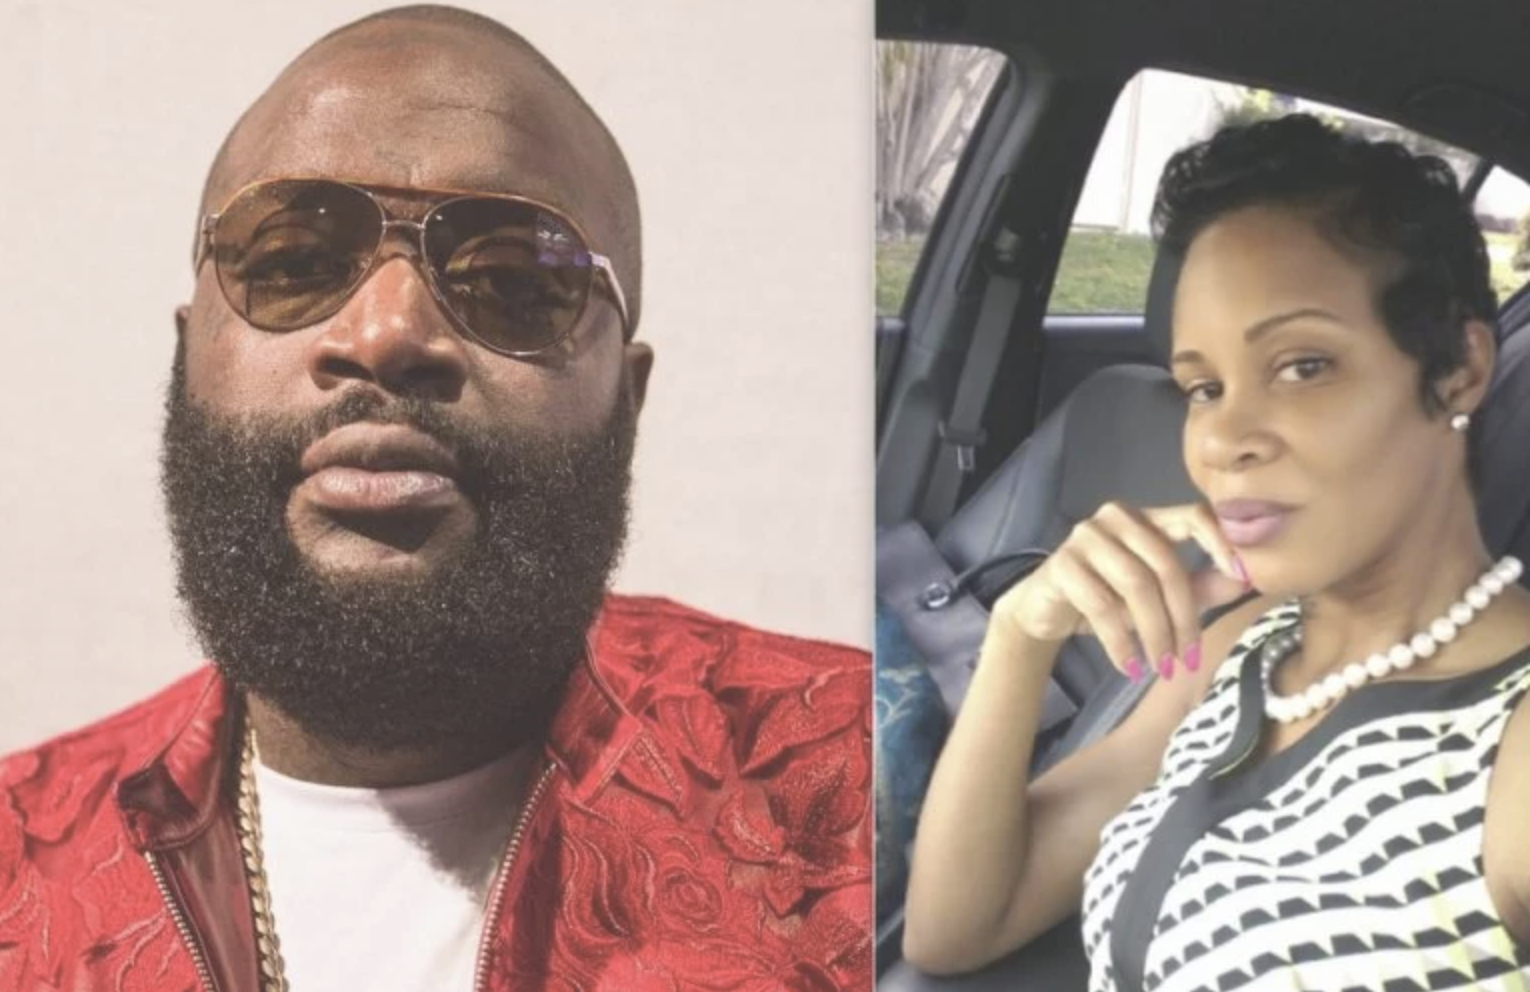 [WATCH] Rick Ross’ Ex Claims He’s In Diddy’s “Freak Off” Tapes